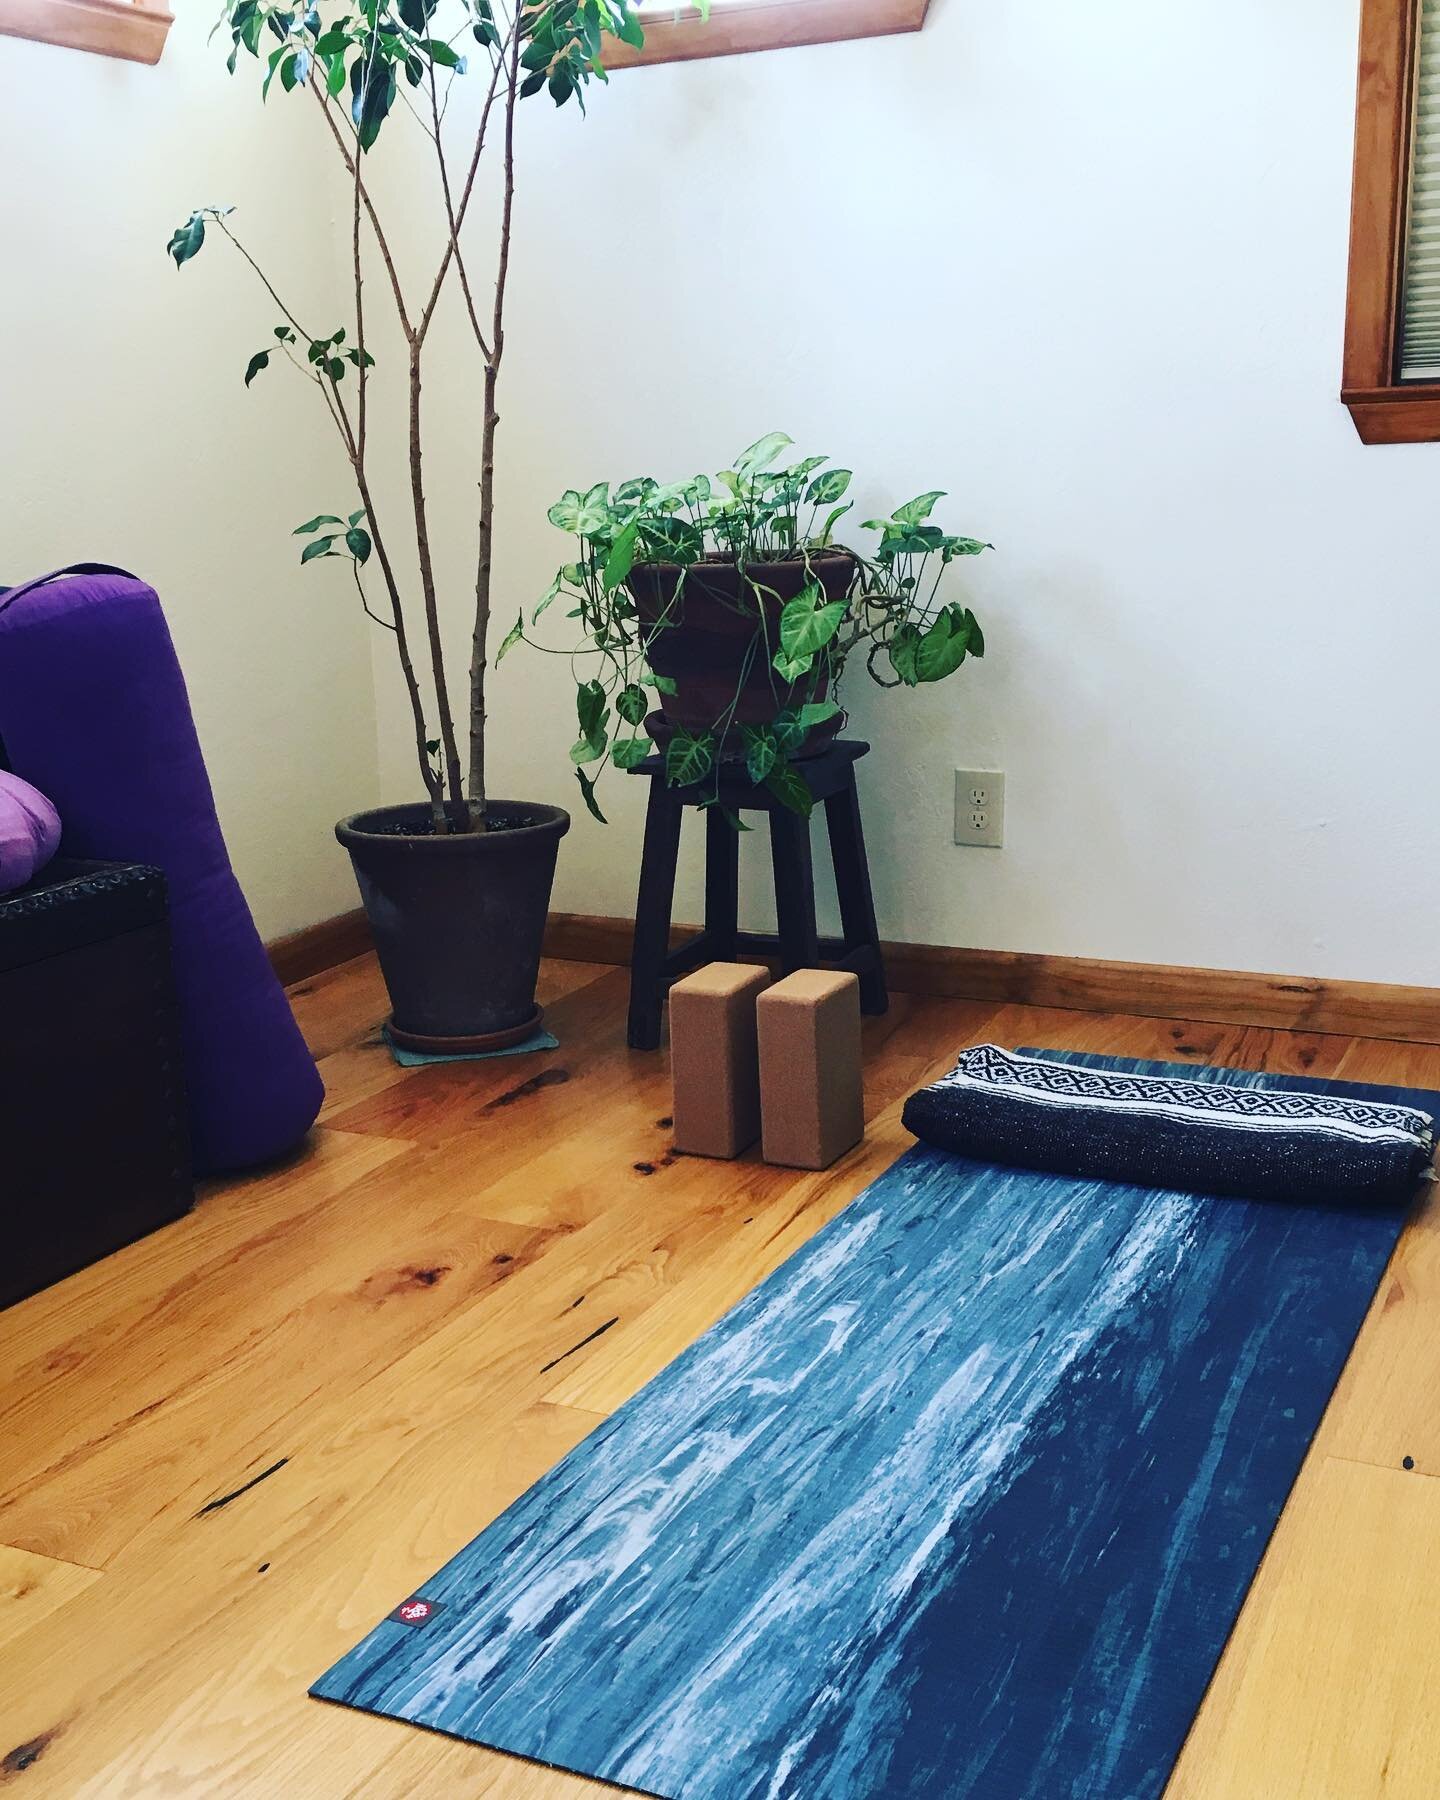 My daily yoga practice spot. A little sanctuary tucked into the corner of my bedroom. More important now than ever.
.
.
If you need a little extra support right now or maybe some guidance for your own home yoga practice, we&rsquo;re now offering a fe